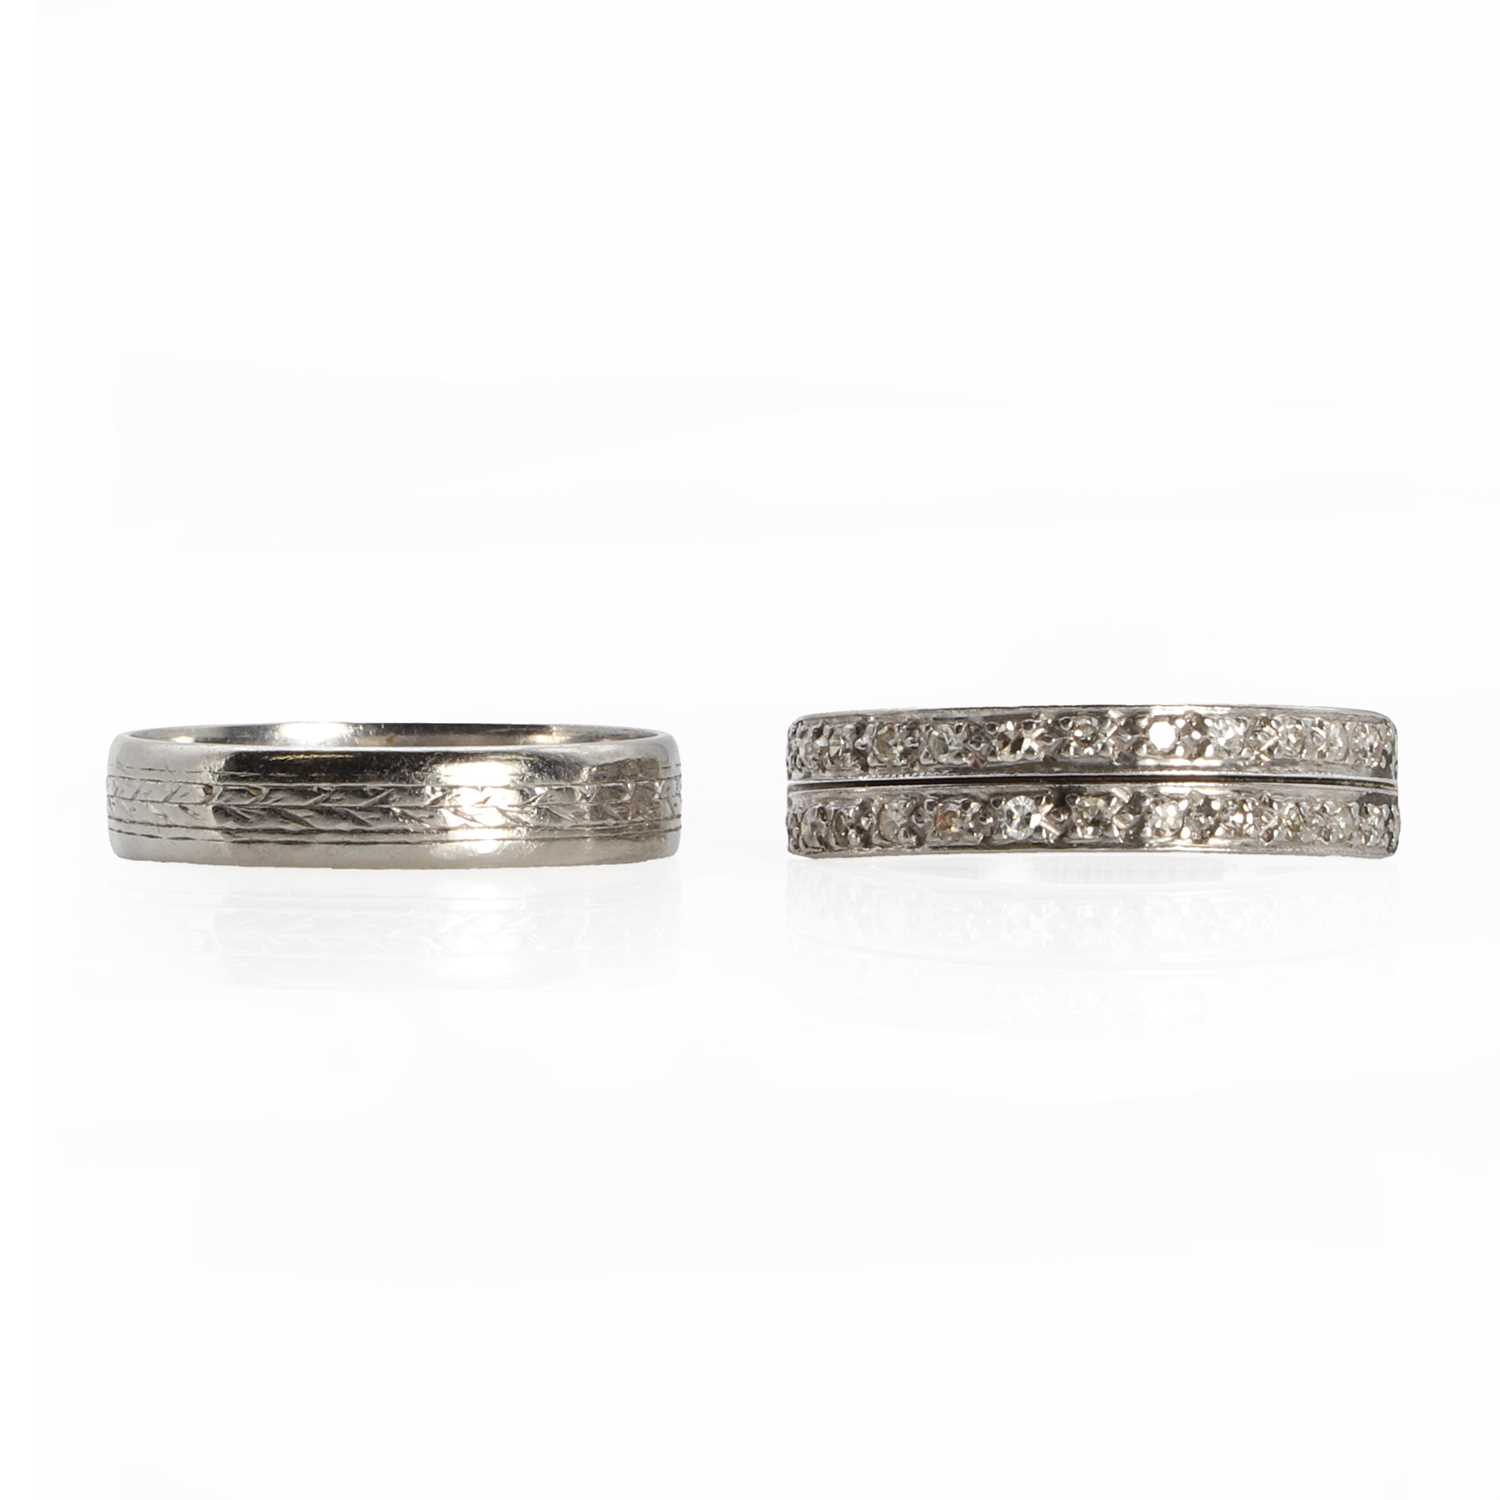 A white gold diamond half eternity ring and a platinum wedding ring,